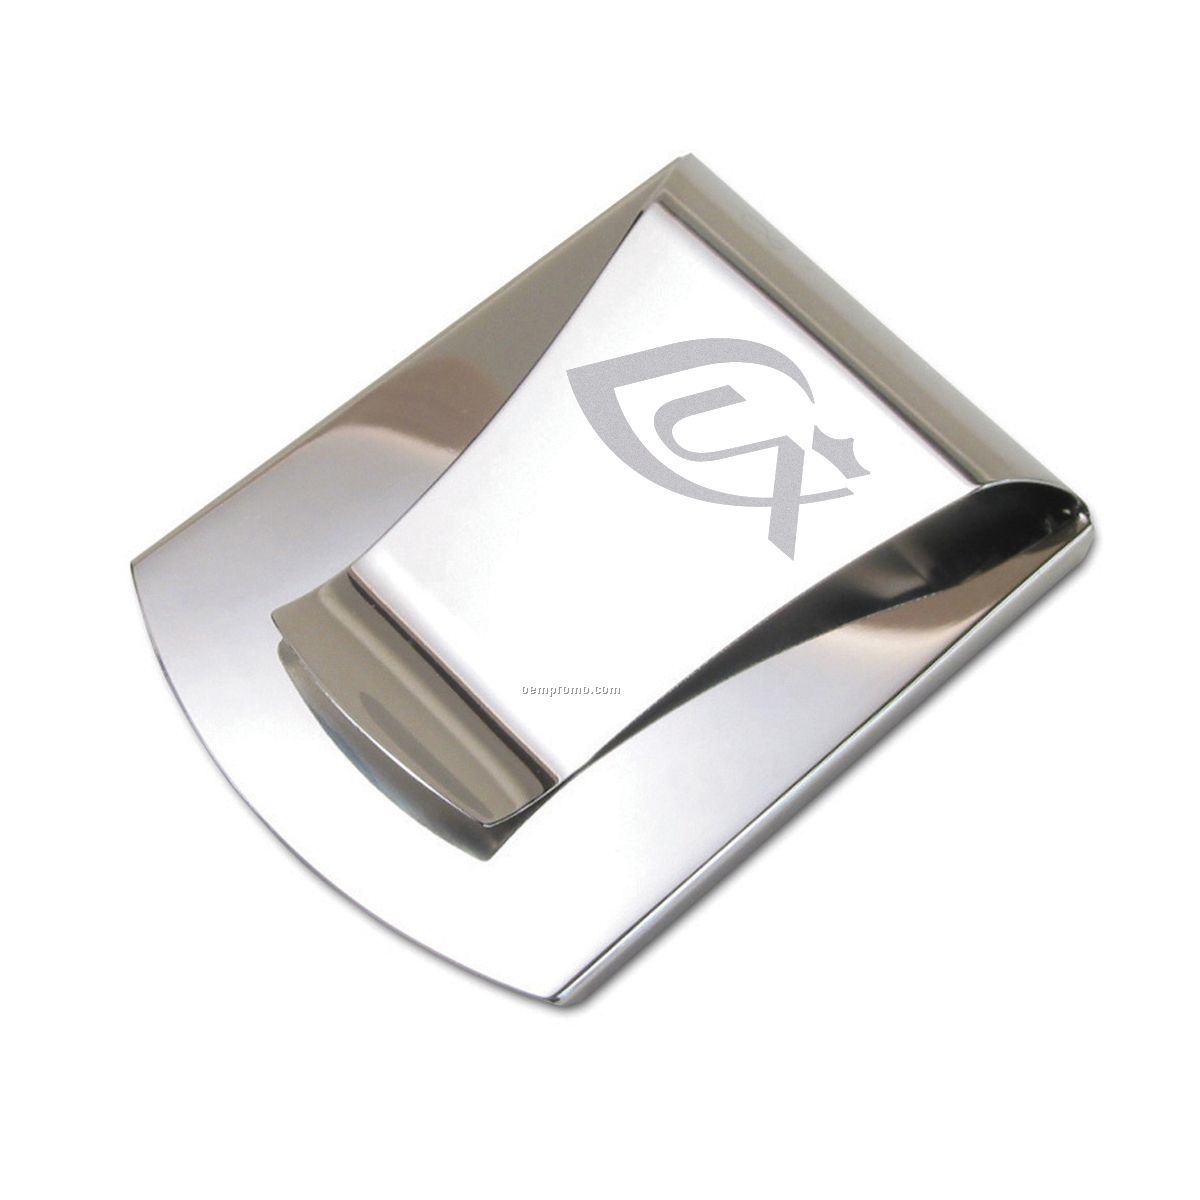 Smart Money Clip - Polished Stainless Steel